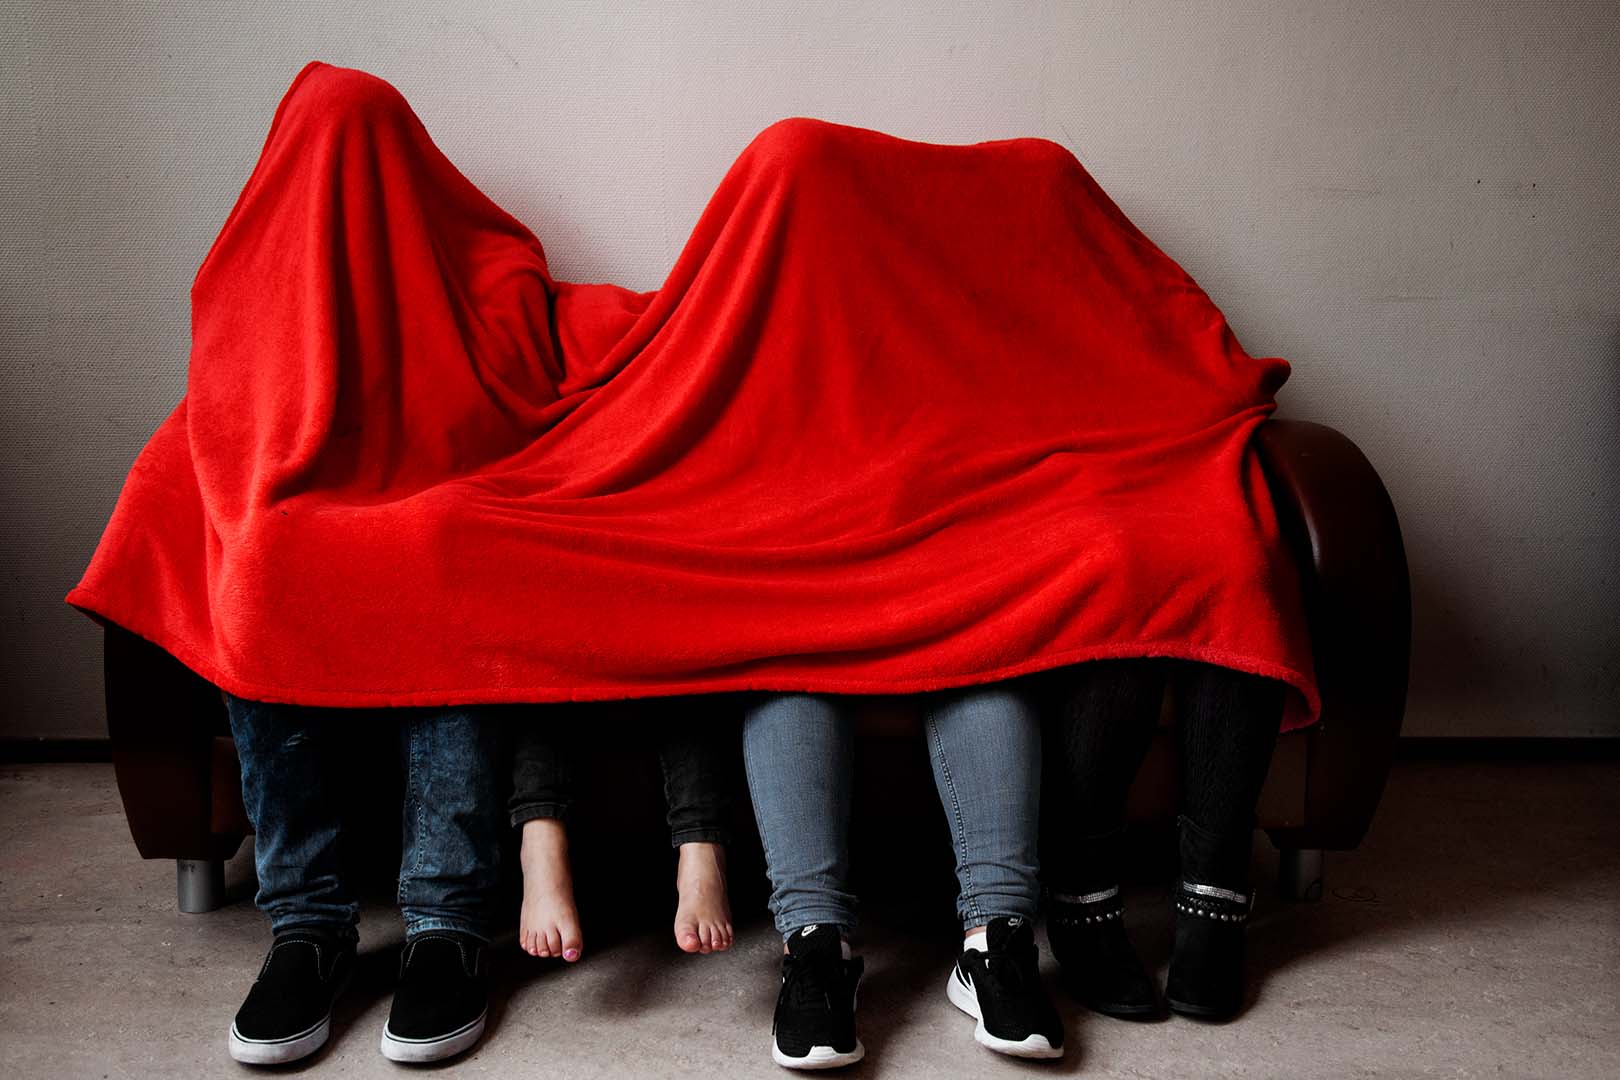 A family of four sits under a red blanket